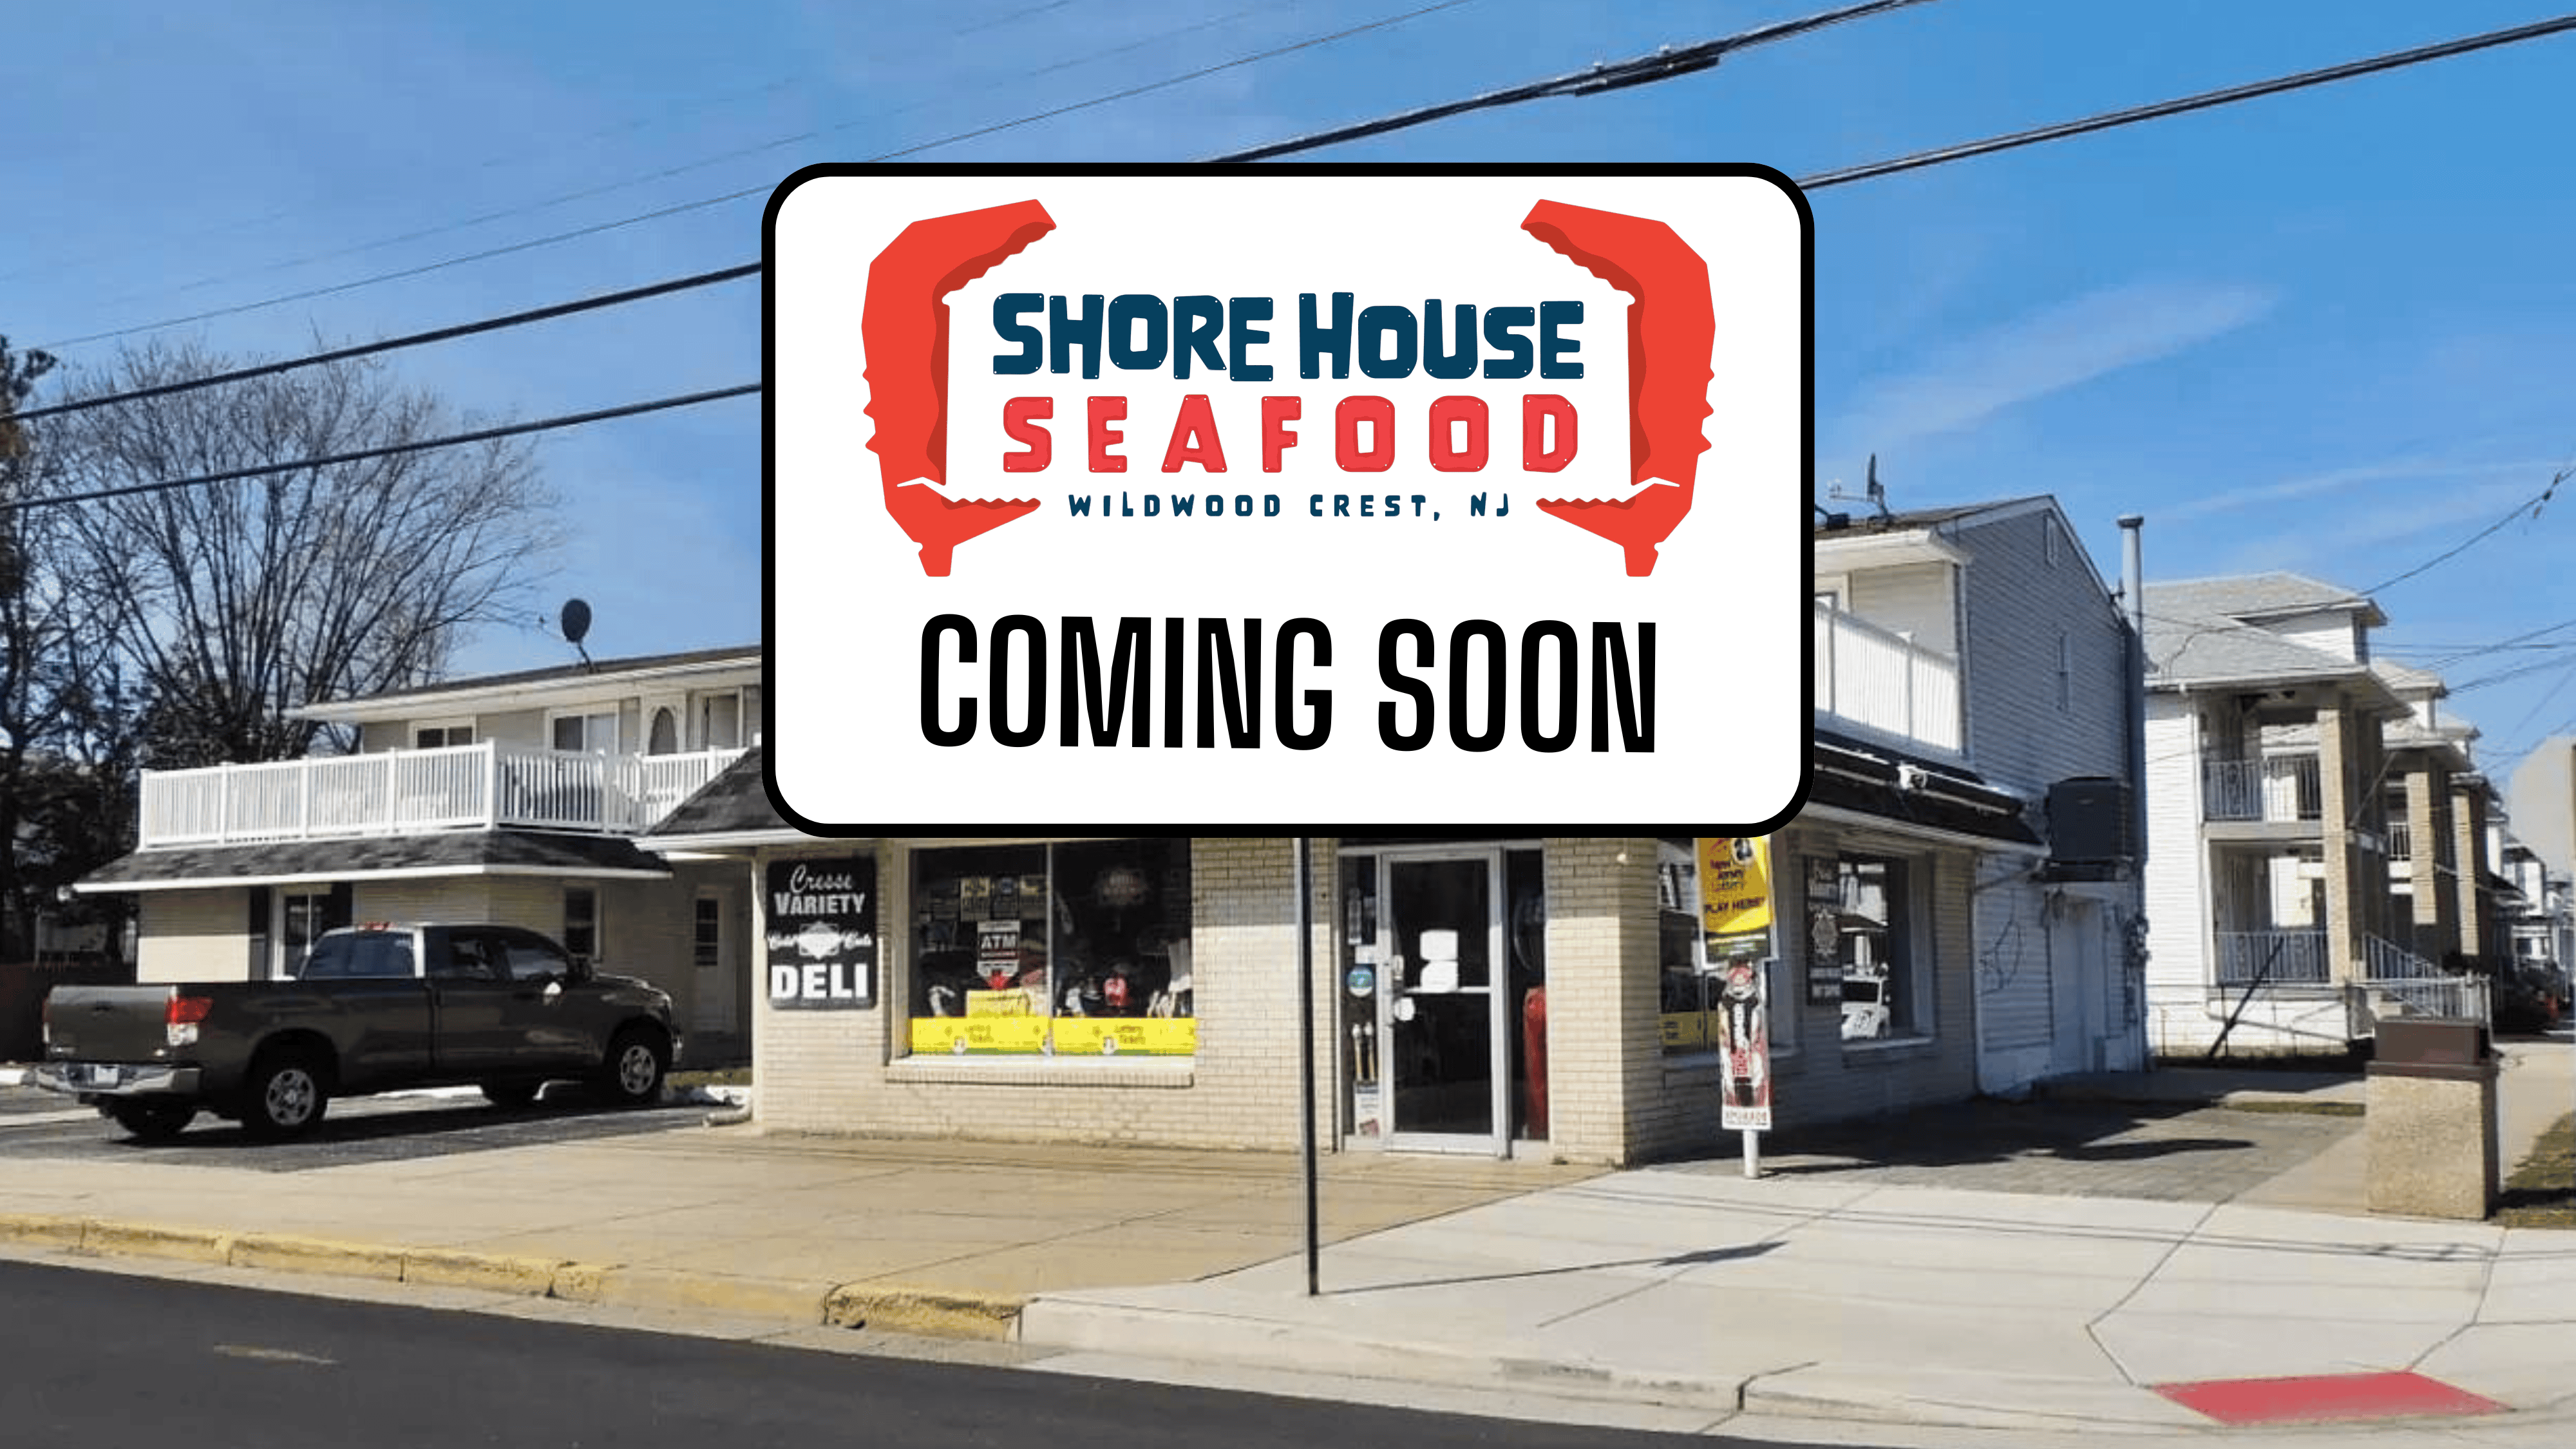 NEW - Shore House Seafood in Wildwood Crest